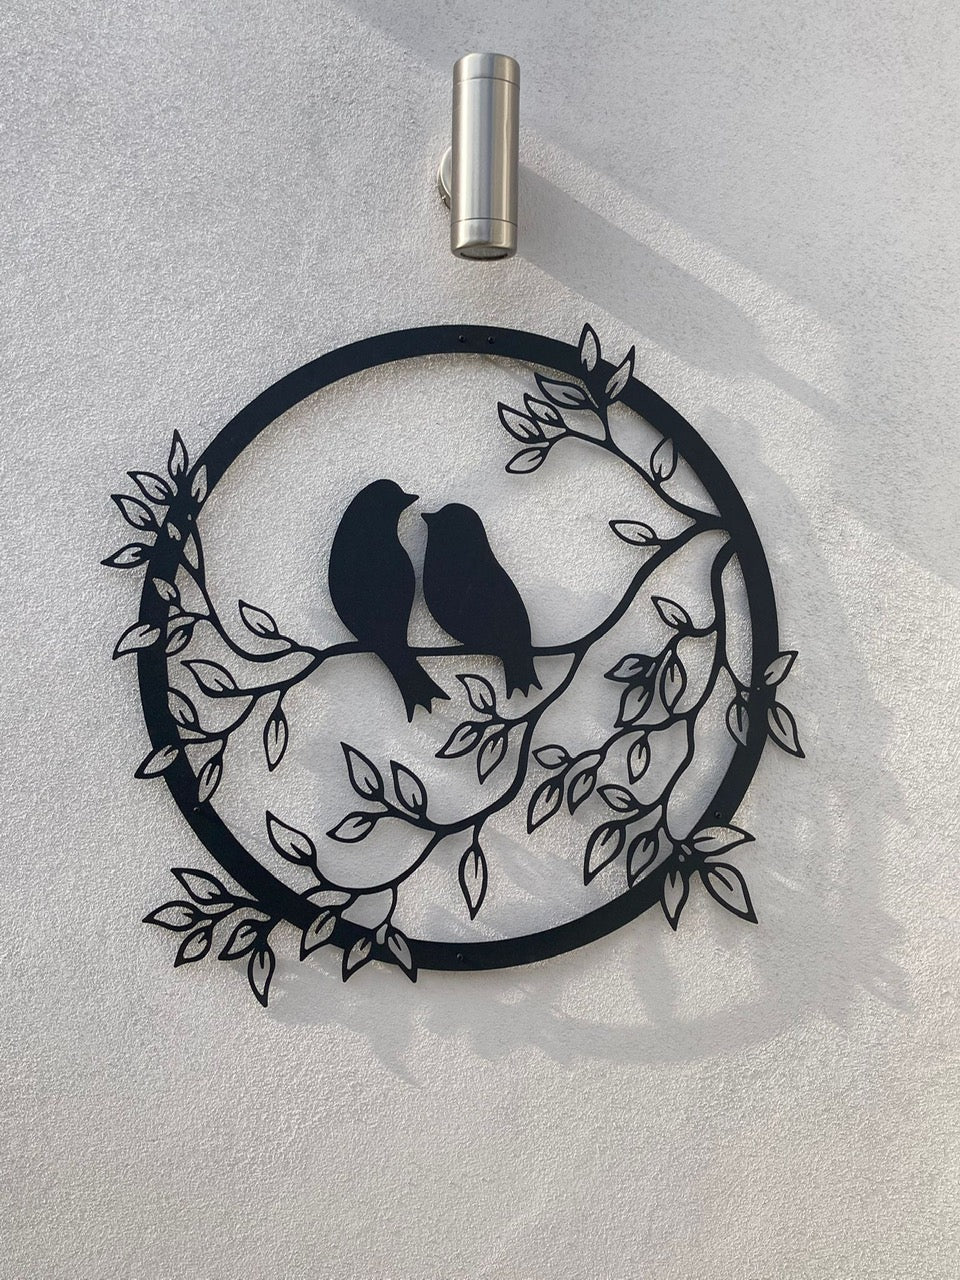 Metal Wall Art two birds siting on a branch looking at each other in a lovinq way with branches and leaves in a circular frame